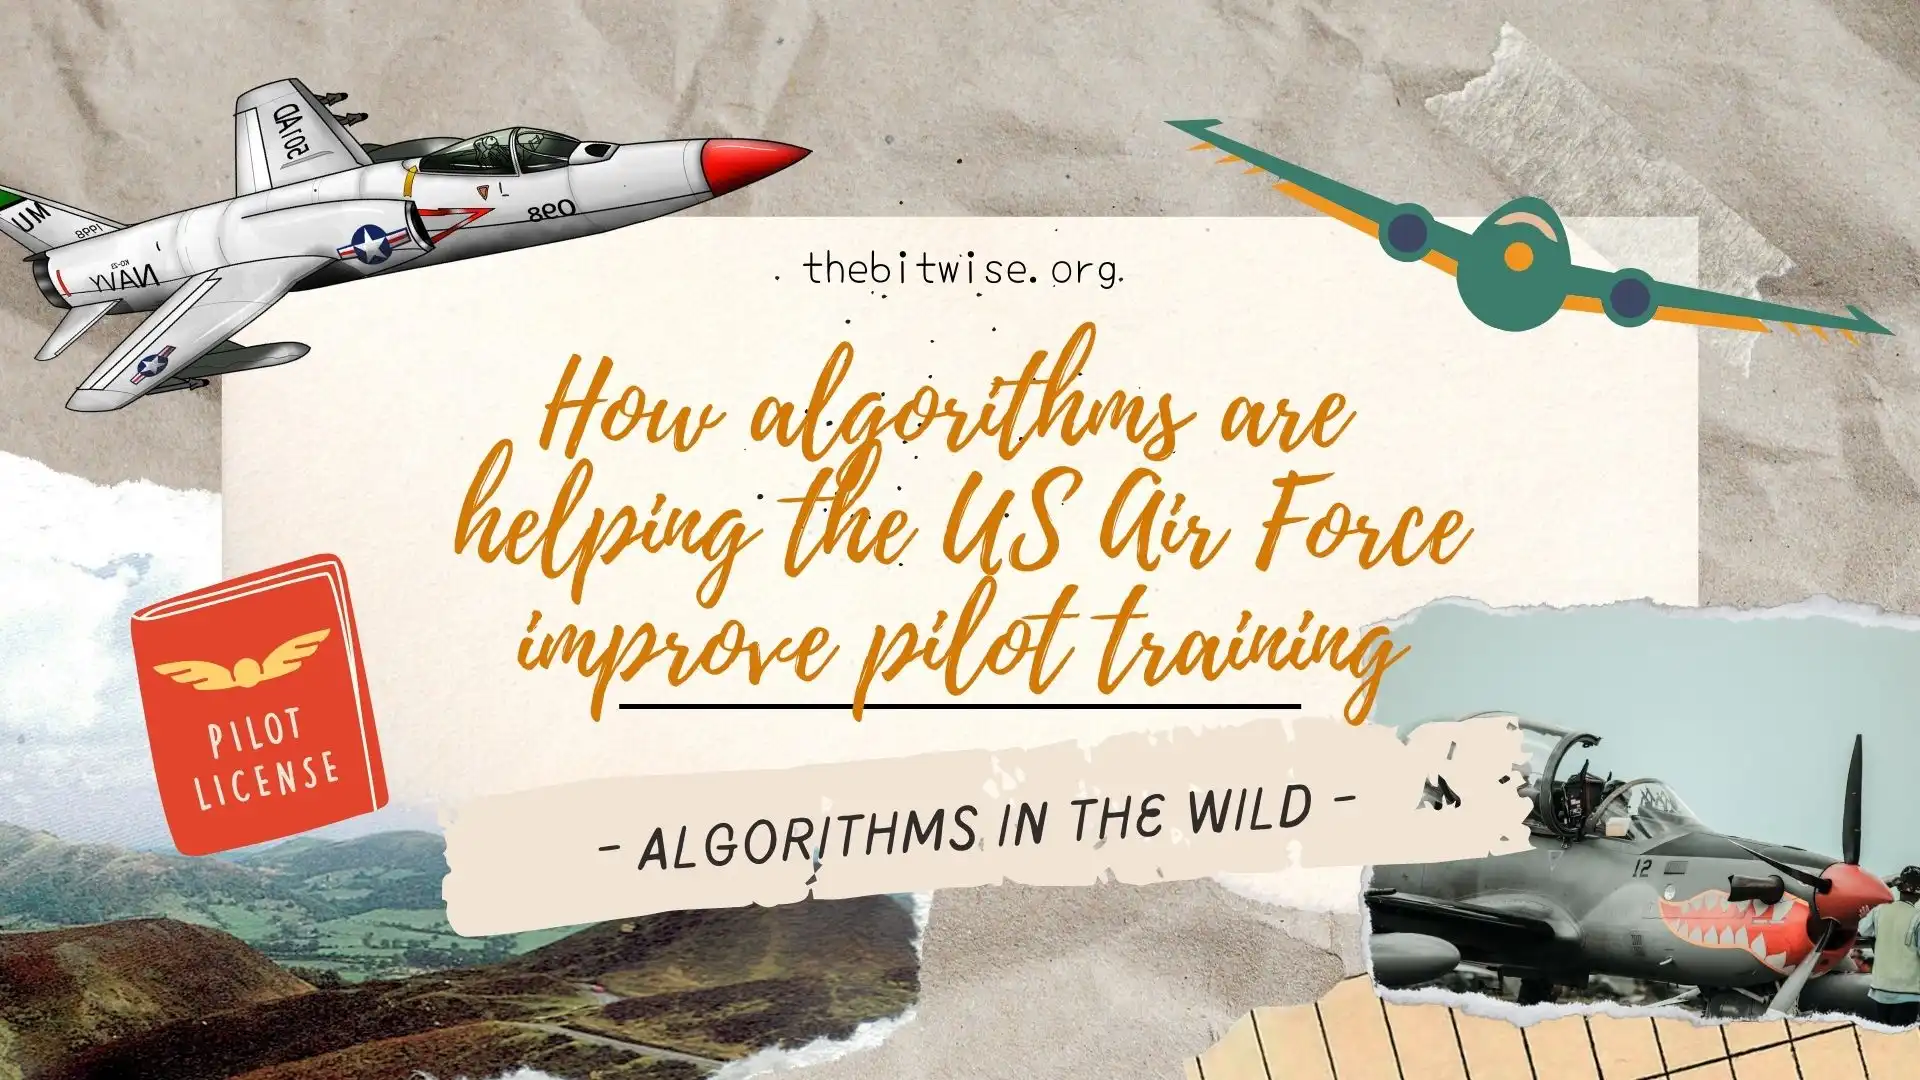 How Machine Learning Algorithms are Helping the US Air Force Improve Pilot Training